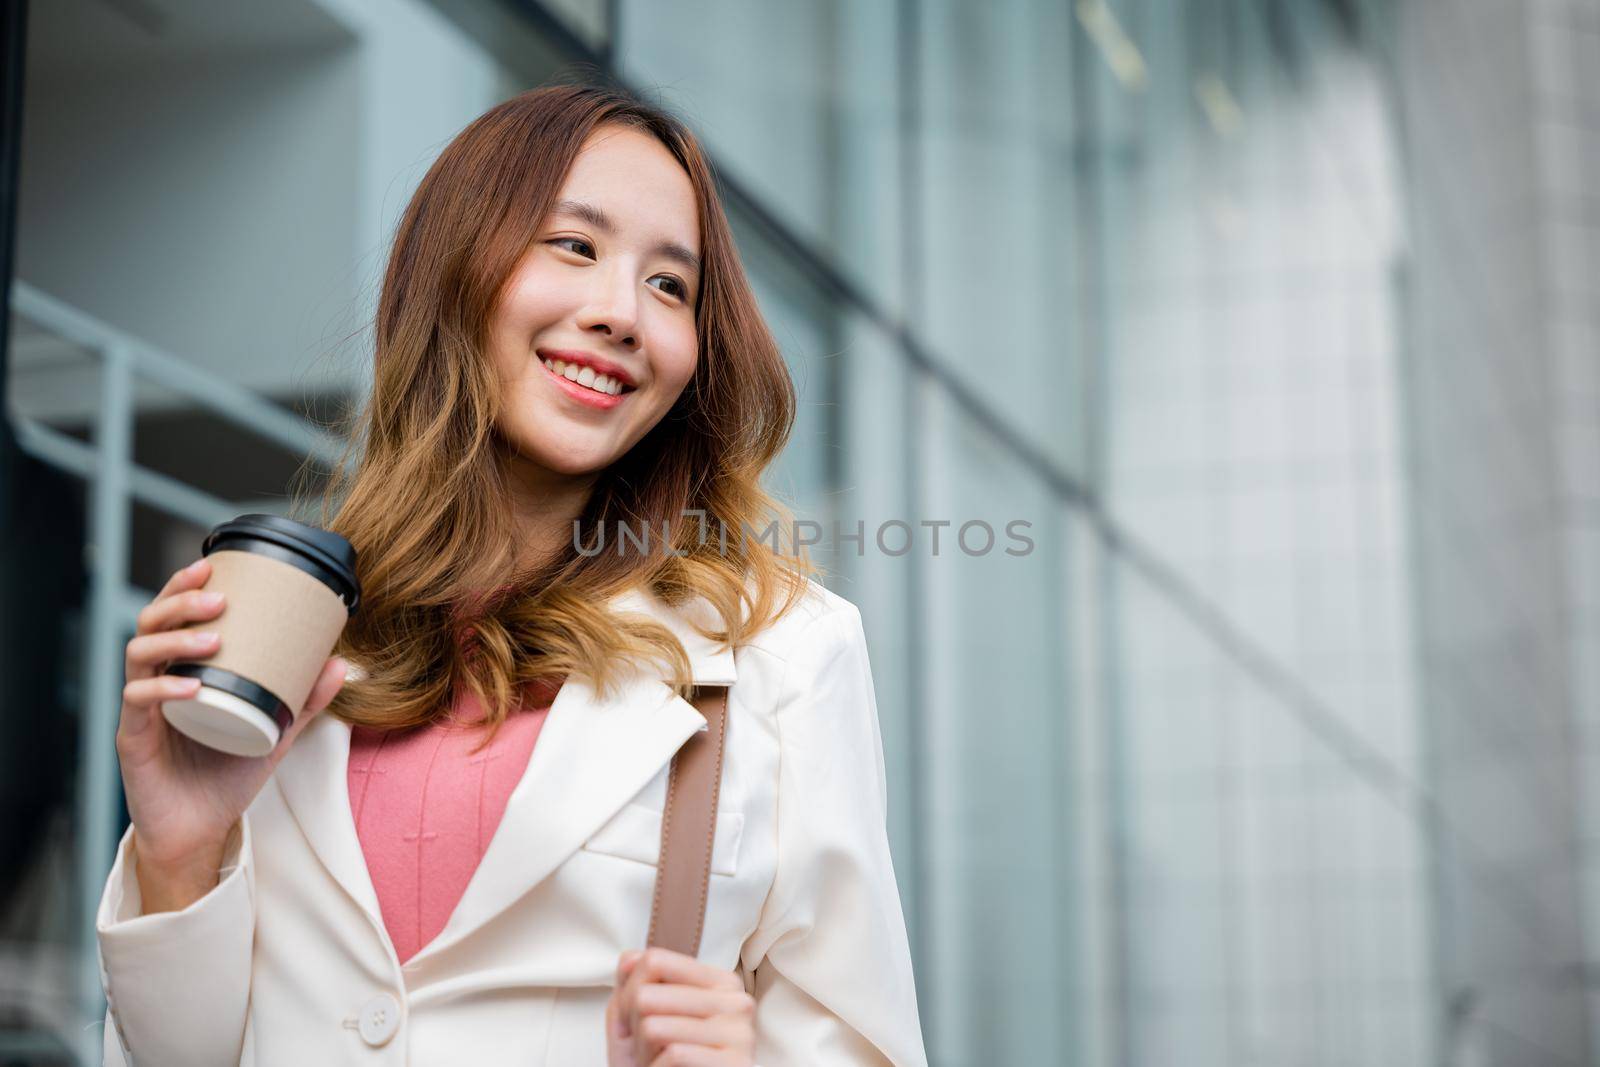 Asian businesswoman holding coffee cup takeaway going to work she walking near her office building, Portrait smiling business woman hold paper cup of hot drink outdoor walking on street